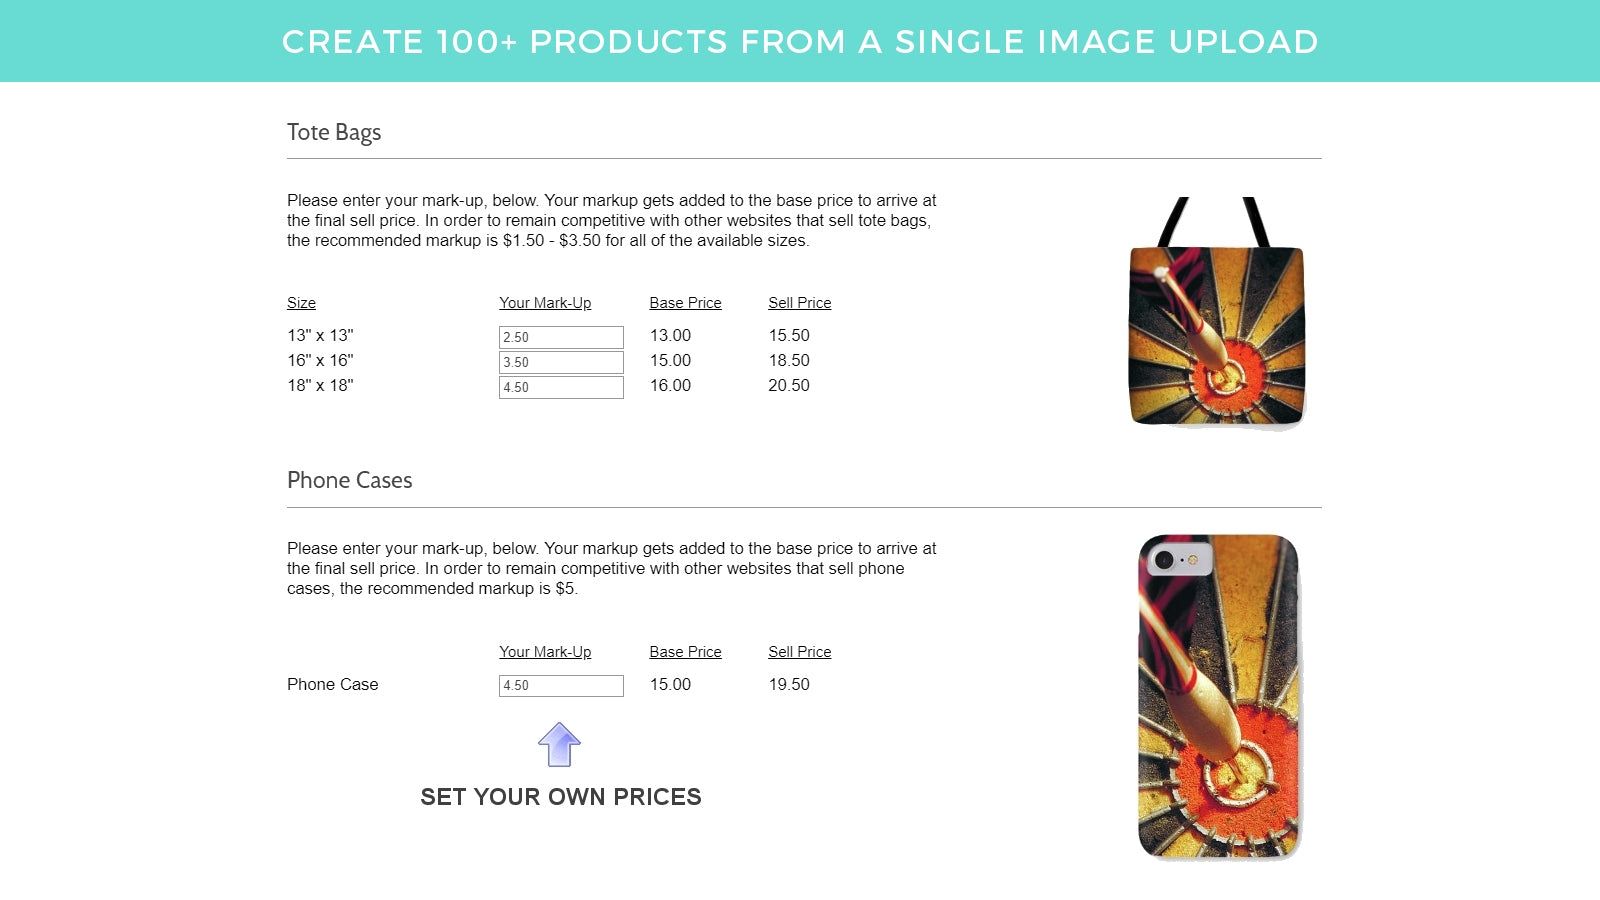 Create 100+ Print-On-Demand Products From a Single Image Upload